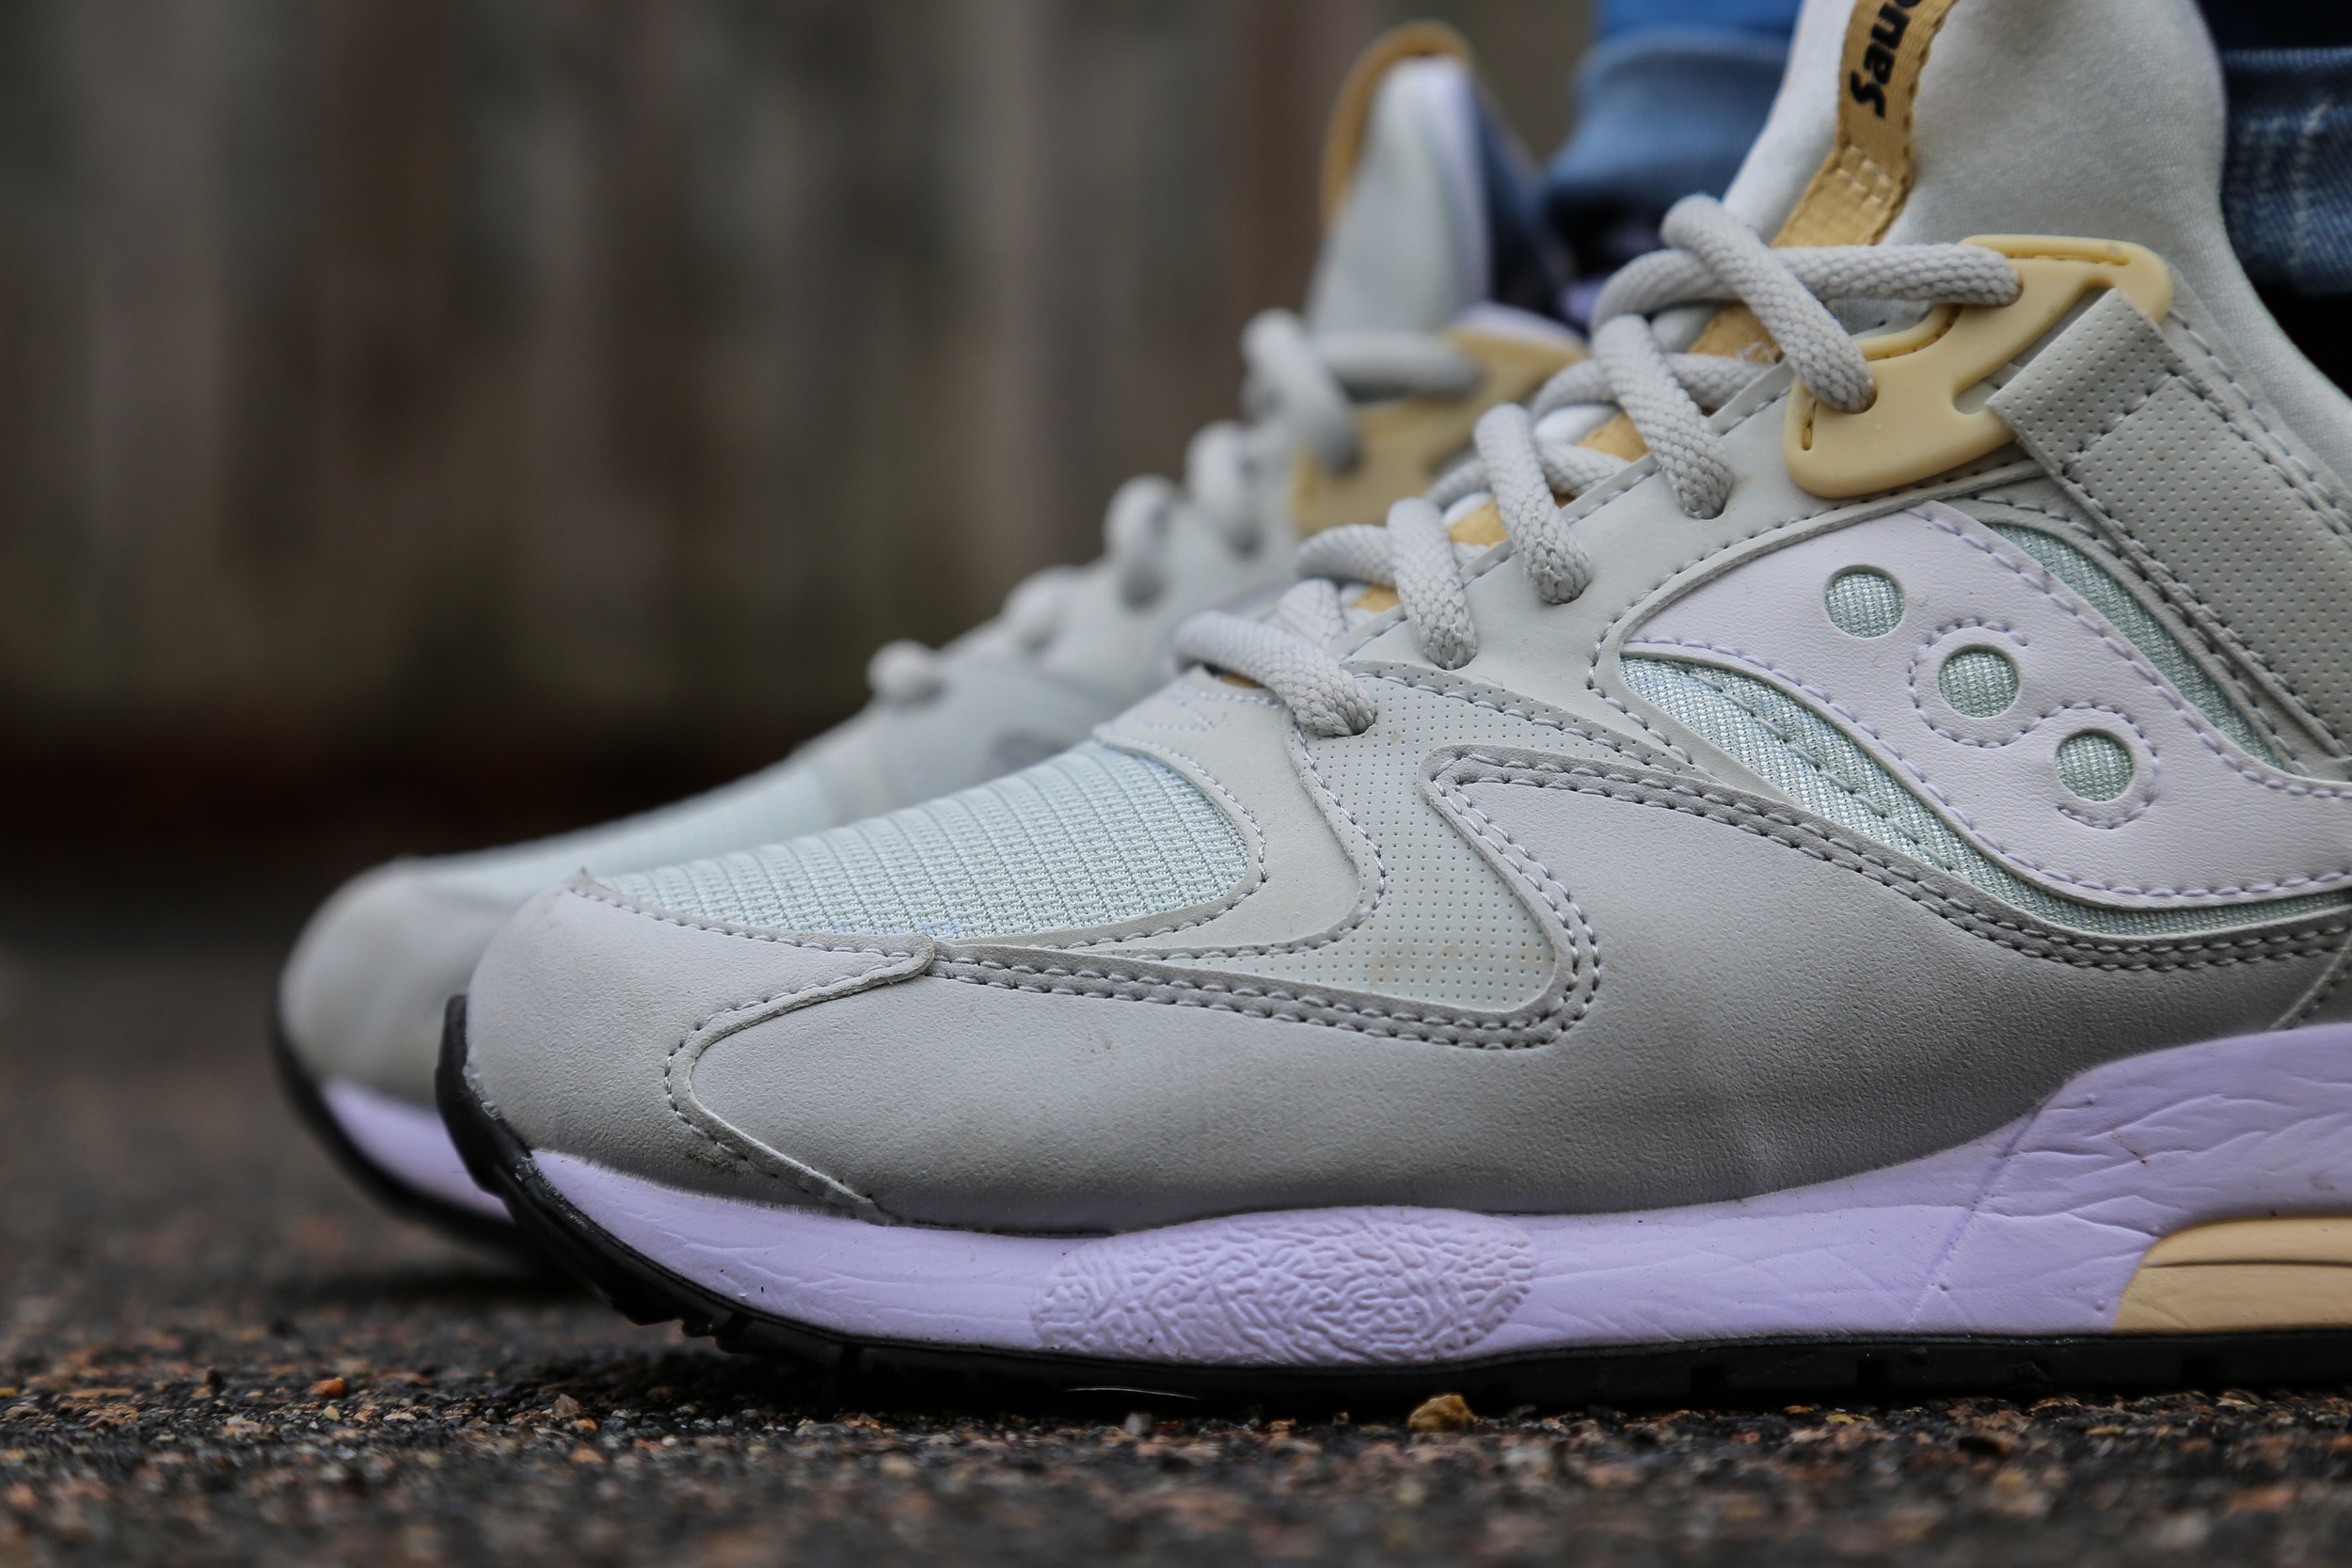 Exclusive Look at the Saucony GRID 9000 